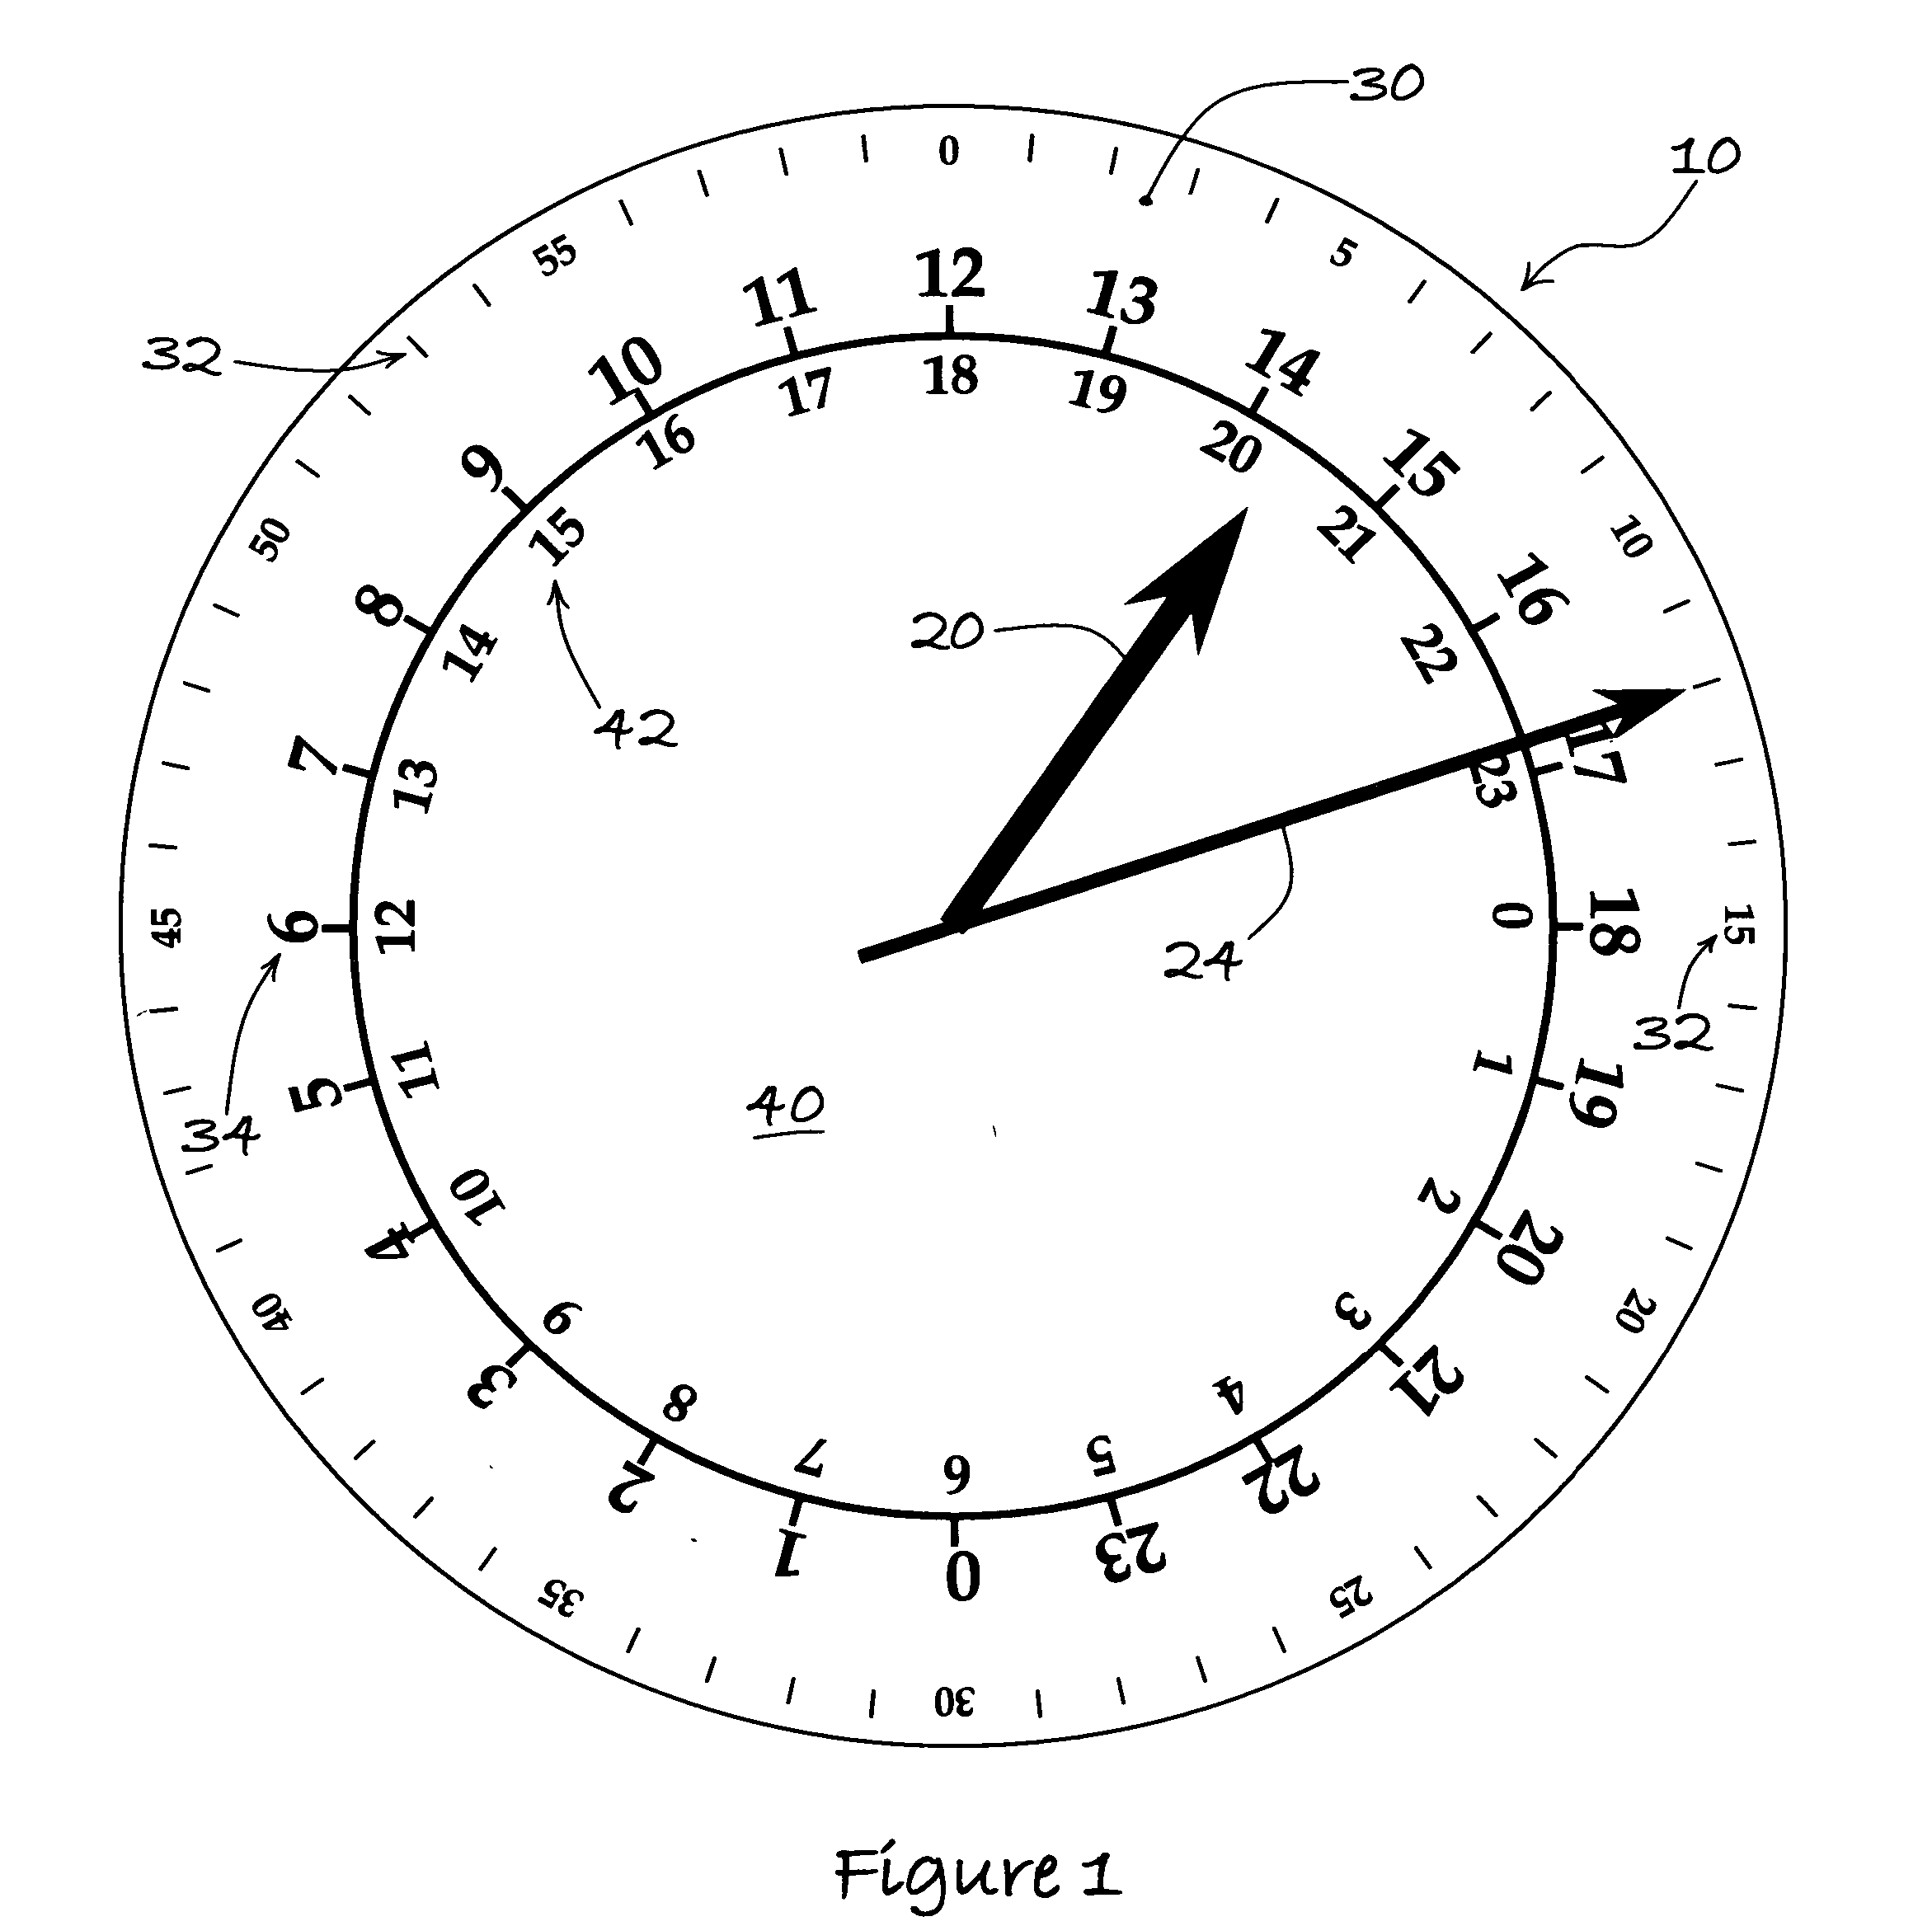 System and method for a clock using a time standard where global time works cooperatively with all local time zones